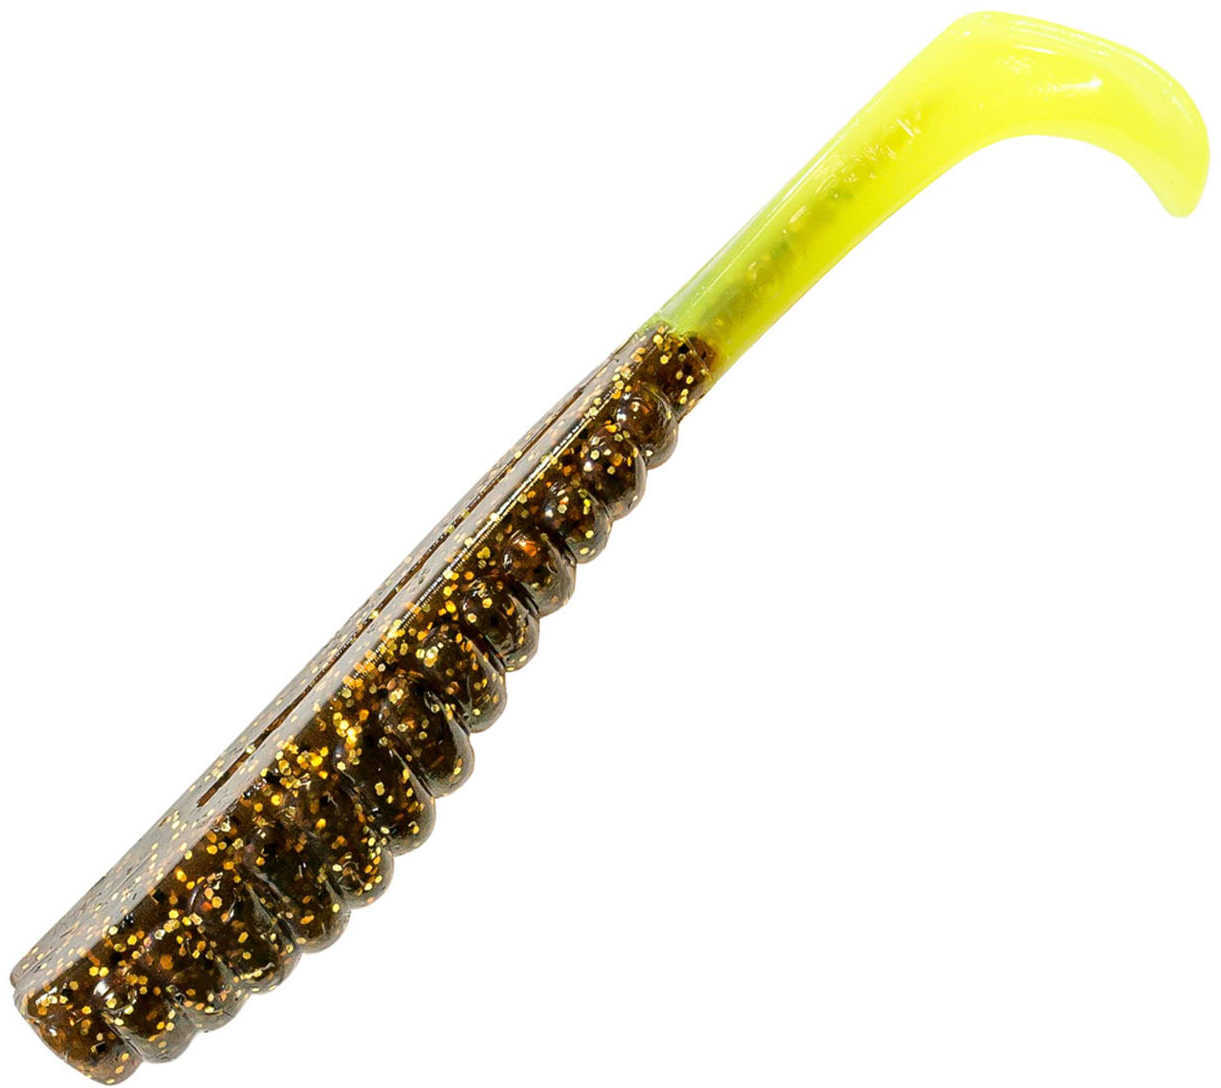 Z-Man / Chatterbait Swimmin TroutTrick 3.5-Inch Bait Rootbeer/Chartreuse Tail 6-Pack Md: TTPT-240PK6